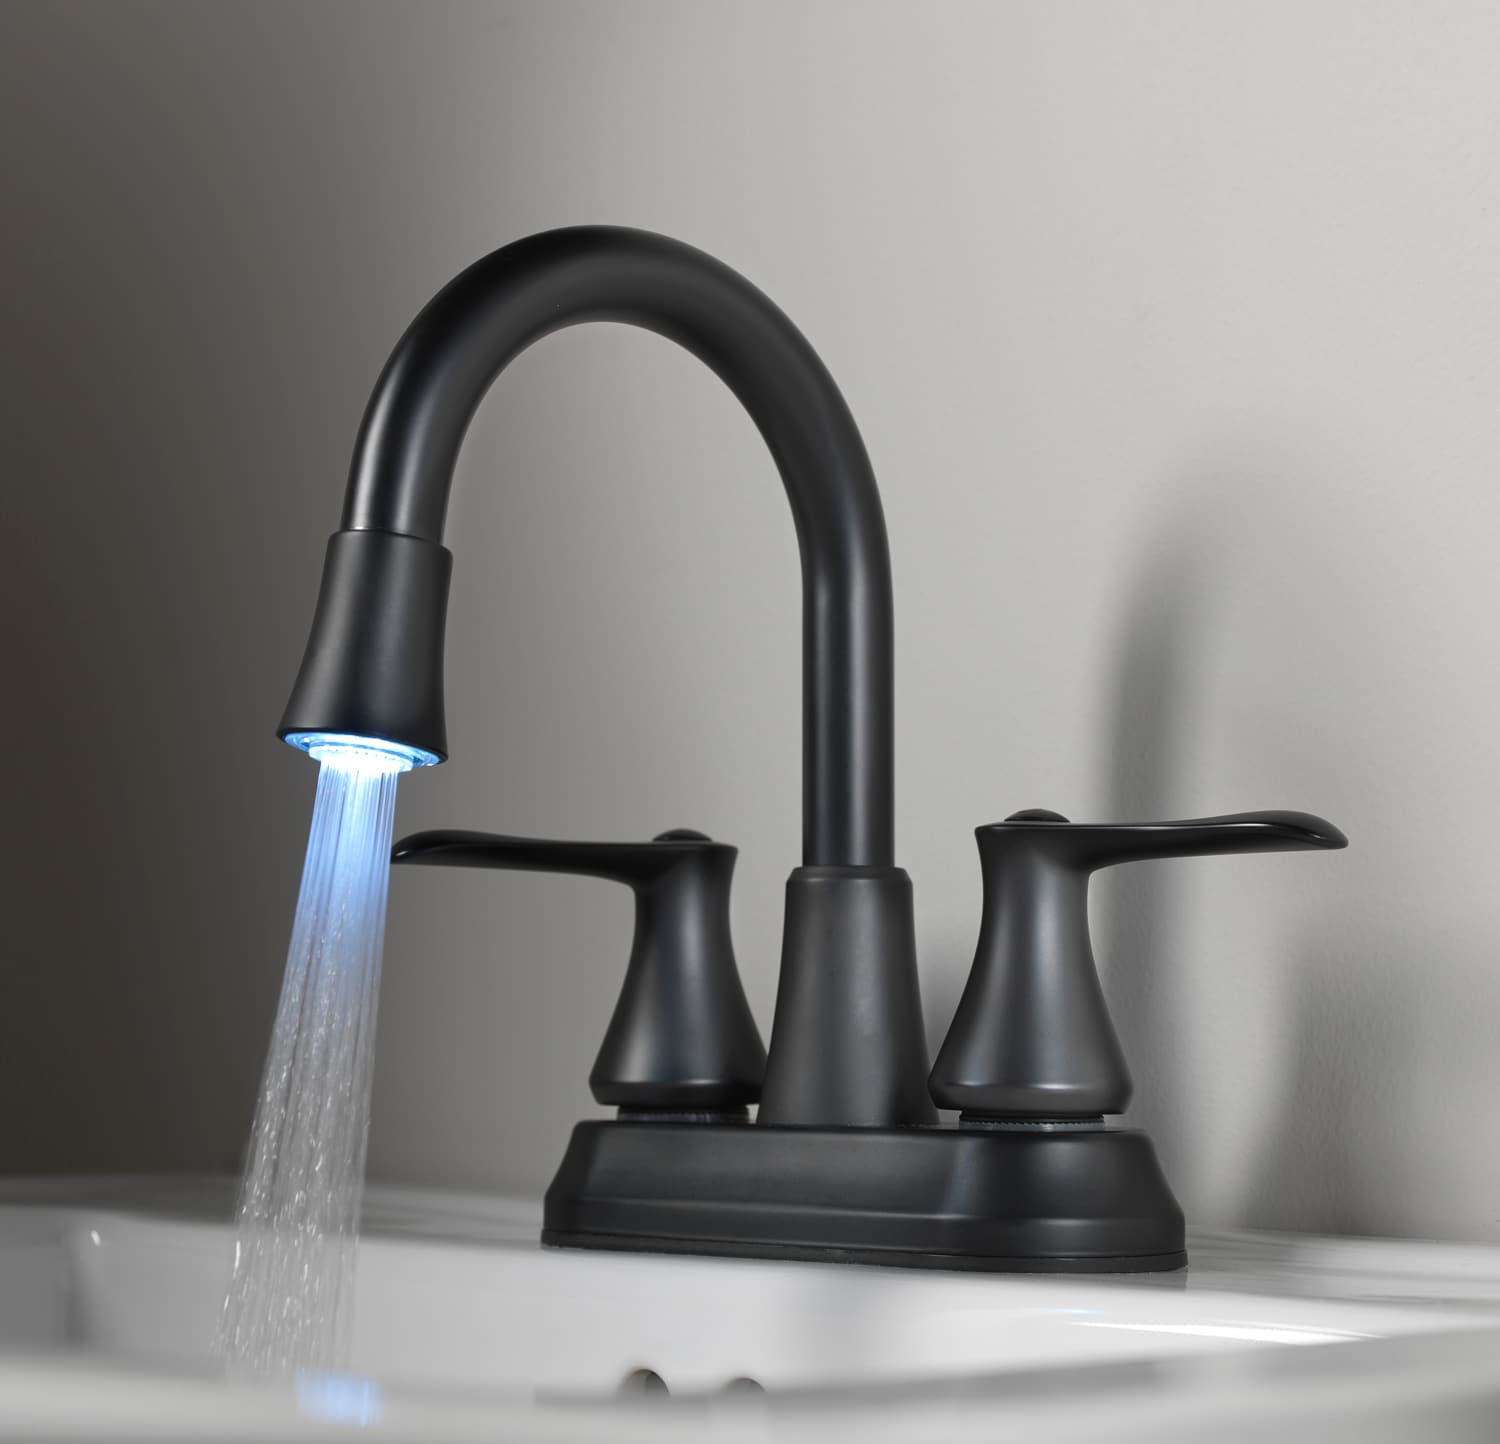 Source LED Water Faucet Night Light 7 Colors Changing Night Lamp